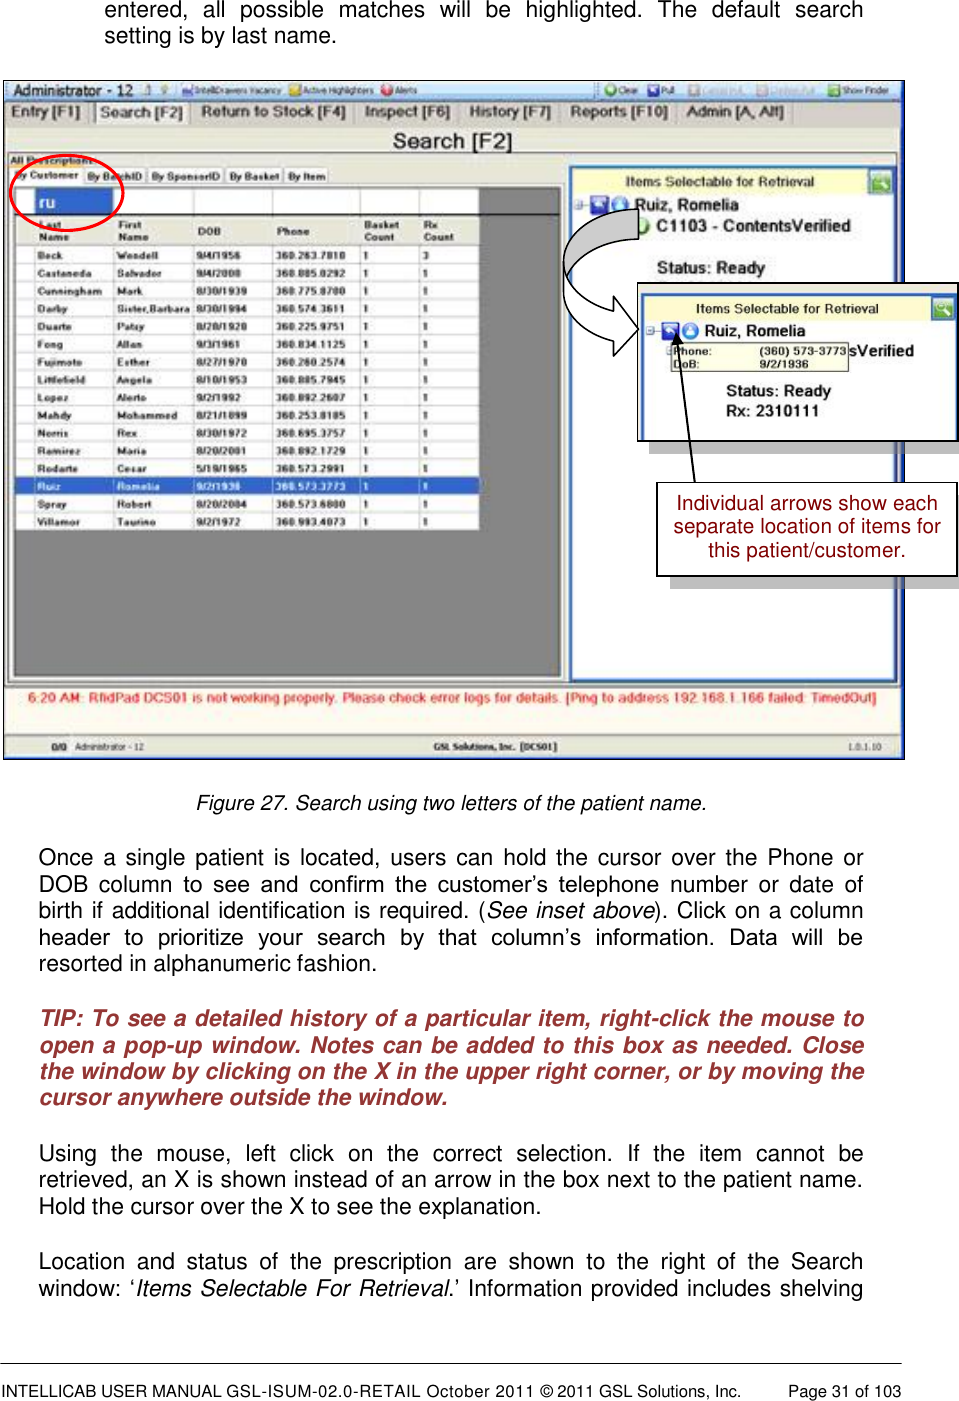  INTELLICAB USER MANUAL GSL-ISUM-02.0-RETAIL October 2011 © 2011 GSL Solutions, Inc.   Page 31 of 103   entered,  all  possible  matches  will  be  highlighted.  The  default  search setting is by last name.  Figure 27. Search using two letters of the patient name. Once a single patient is located, users  can hold the cursor over the Phone or DOB  column  to  see  and  confirm  the  customer’s  telephone  number  or  date  of birth if additional identification is required. (See inset above). Click on a column header  to  prioritize  your  search  by  that  column’s  information.  Data  will  be resorted in alphanumeric fashion. TIP: To see a detailed history of a particular item, right-click the mouse to open a pop-up window. Notes can be added to this box as needed. Close the window by clicking on the X in the upper right corner, or by moving the cursor anywhere outside the window. Using  the  mouse,  left  click  on  the  correct  selection.  If  the  item  cannot  be retrieved, an X is shown instead of an arrow in the box next to the patient name. Hold the cursor over the X to see the explanation. Location  and  status  of  the  prescription  are  shown  to  the  right  of  the  Search window: ‘Items Selectable For Retrieval.’ Information provided includes shelving Individual arrows show each separate location of items for this patient/customer. 